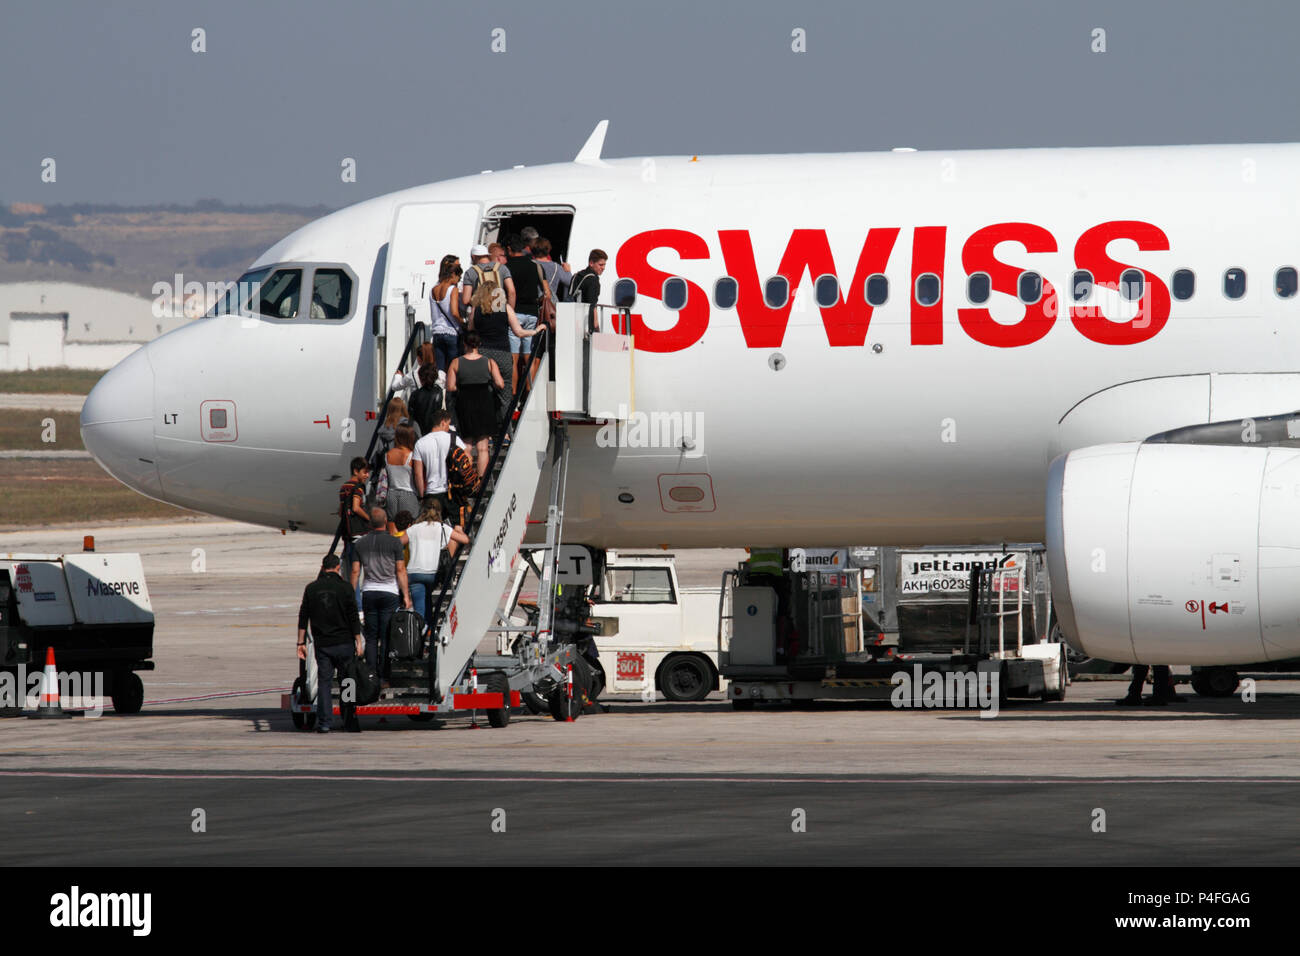 Passengers boarding a Swiss International Air Lines Airbus A320 jet plane before departure. Commercial air travel. Stock Photo